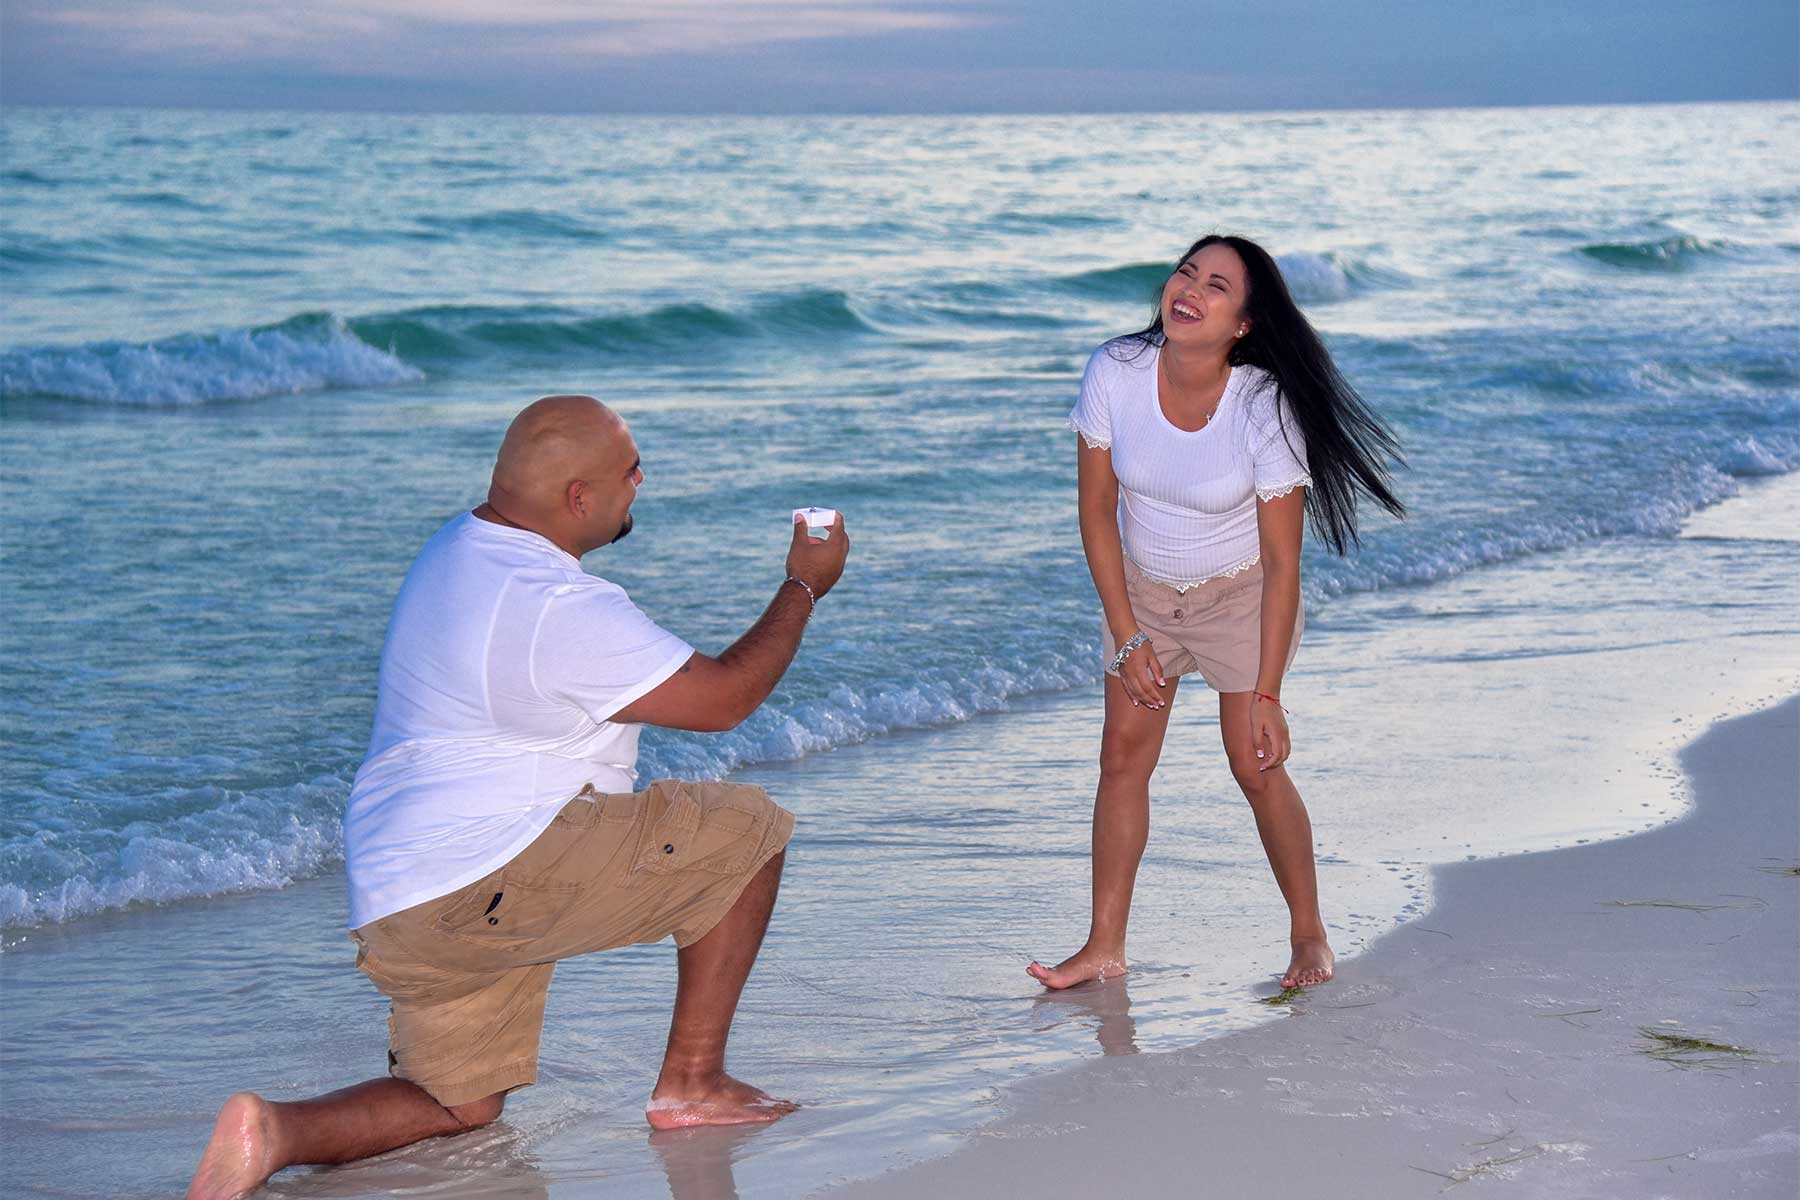 Surprise, she said yes and our PCB photographer was there to document it all!